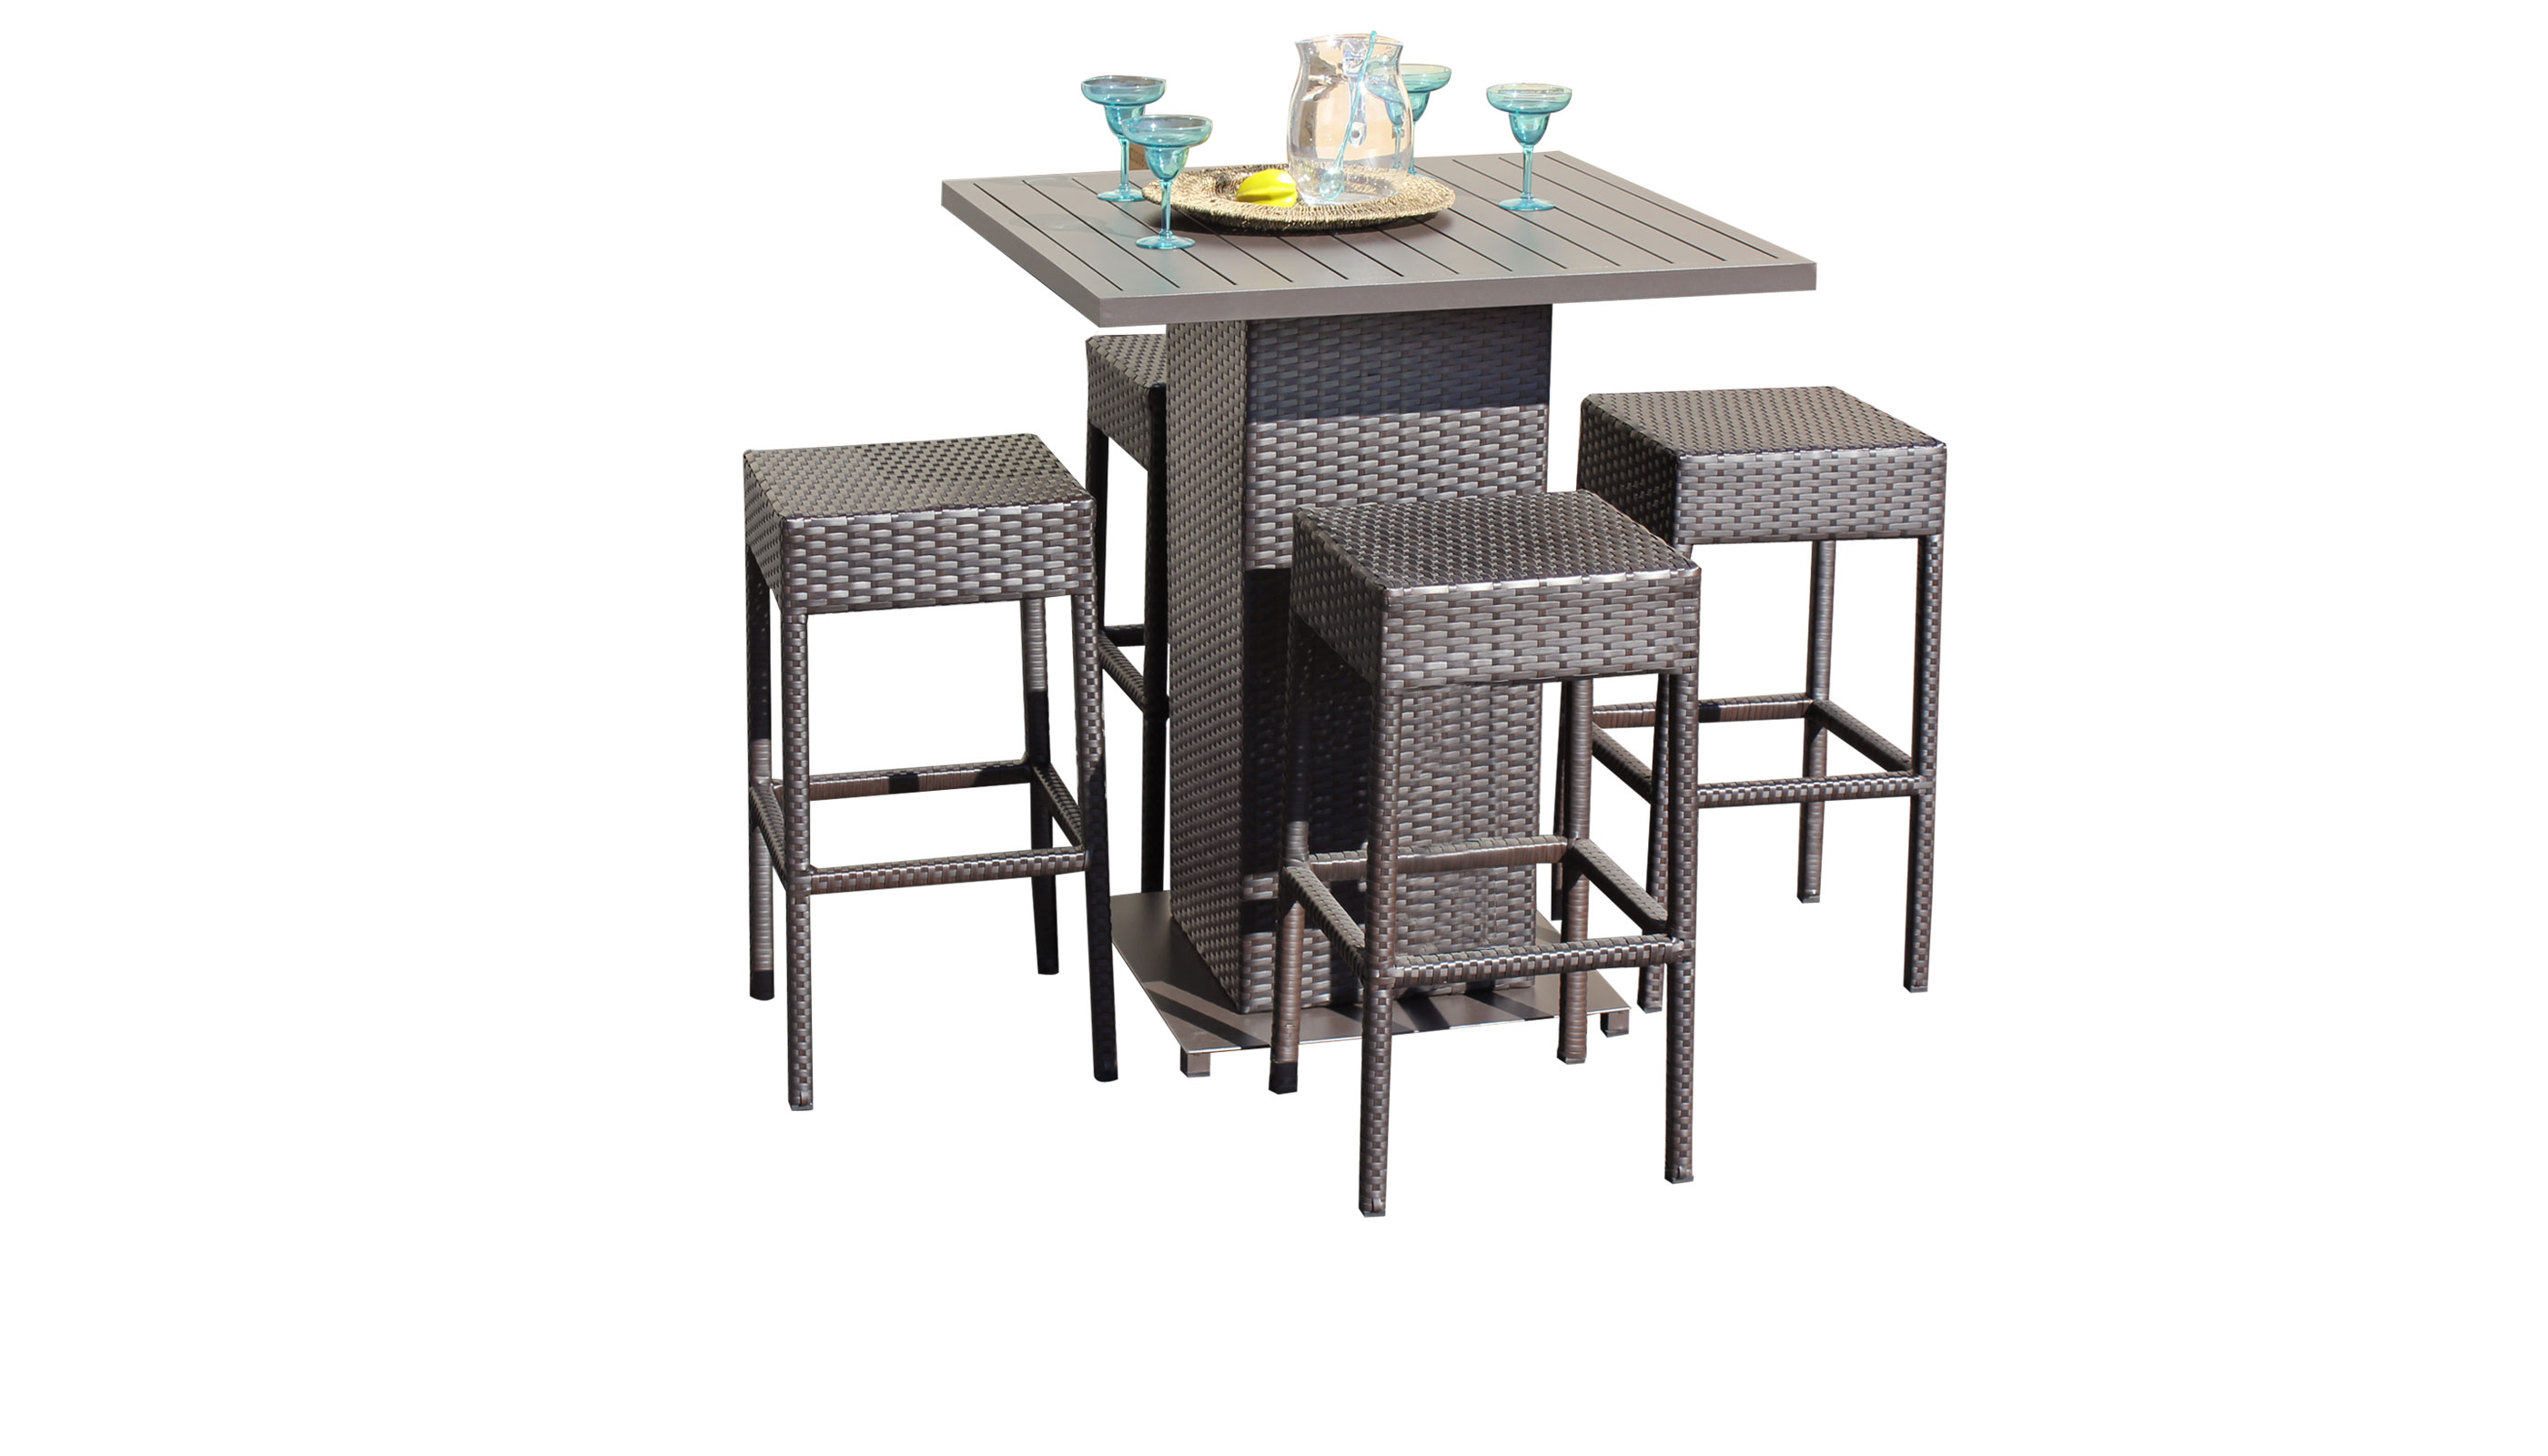 Barbados Pub Table Set With Backless Barstools 5 Piece Outdoor Wicker Patio Furniture - TK Classics